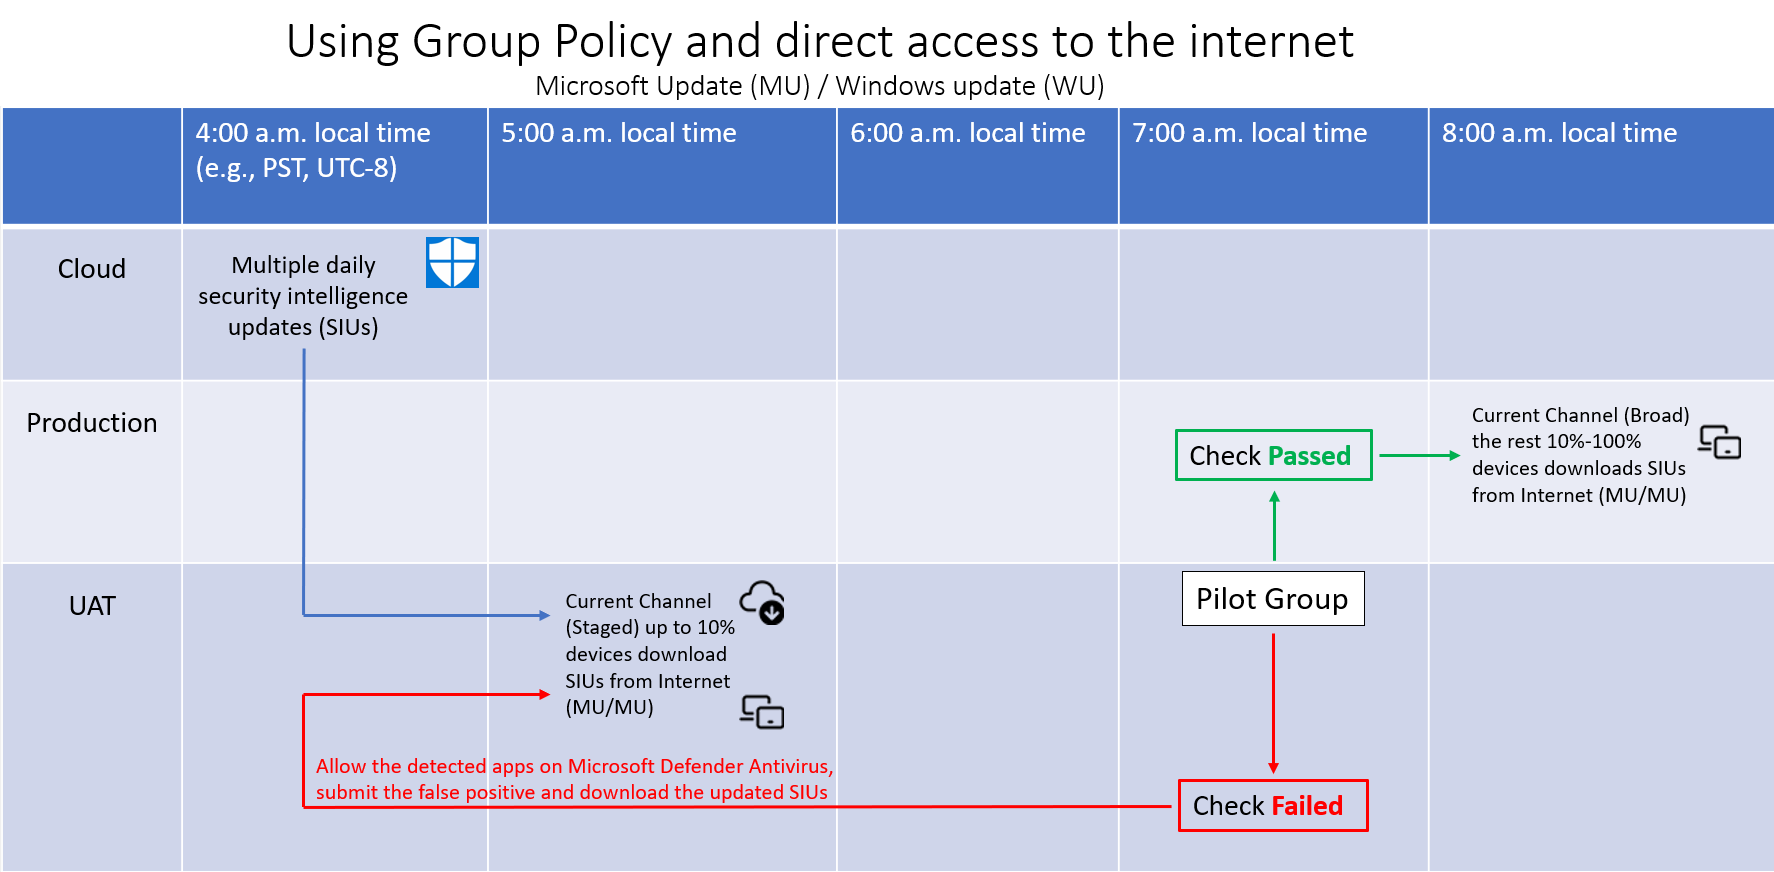 Screenshot that shows an example schedule for Microsoft Defender Antivirus ring deployments in Group Policy and Microsoft Updates environments.